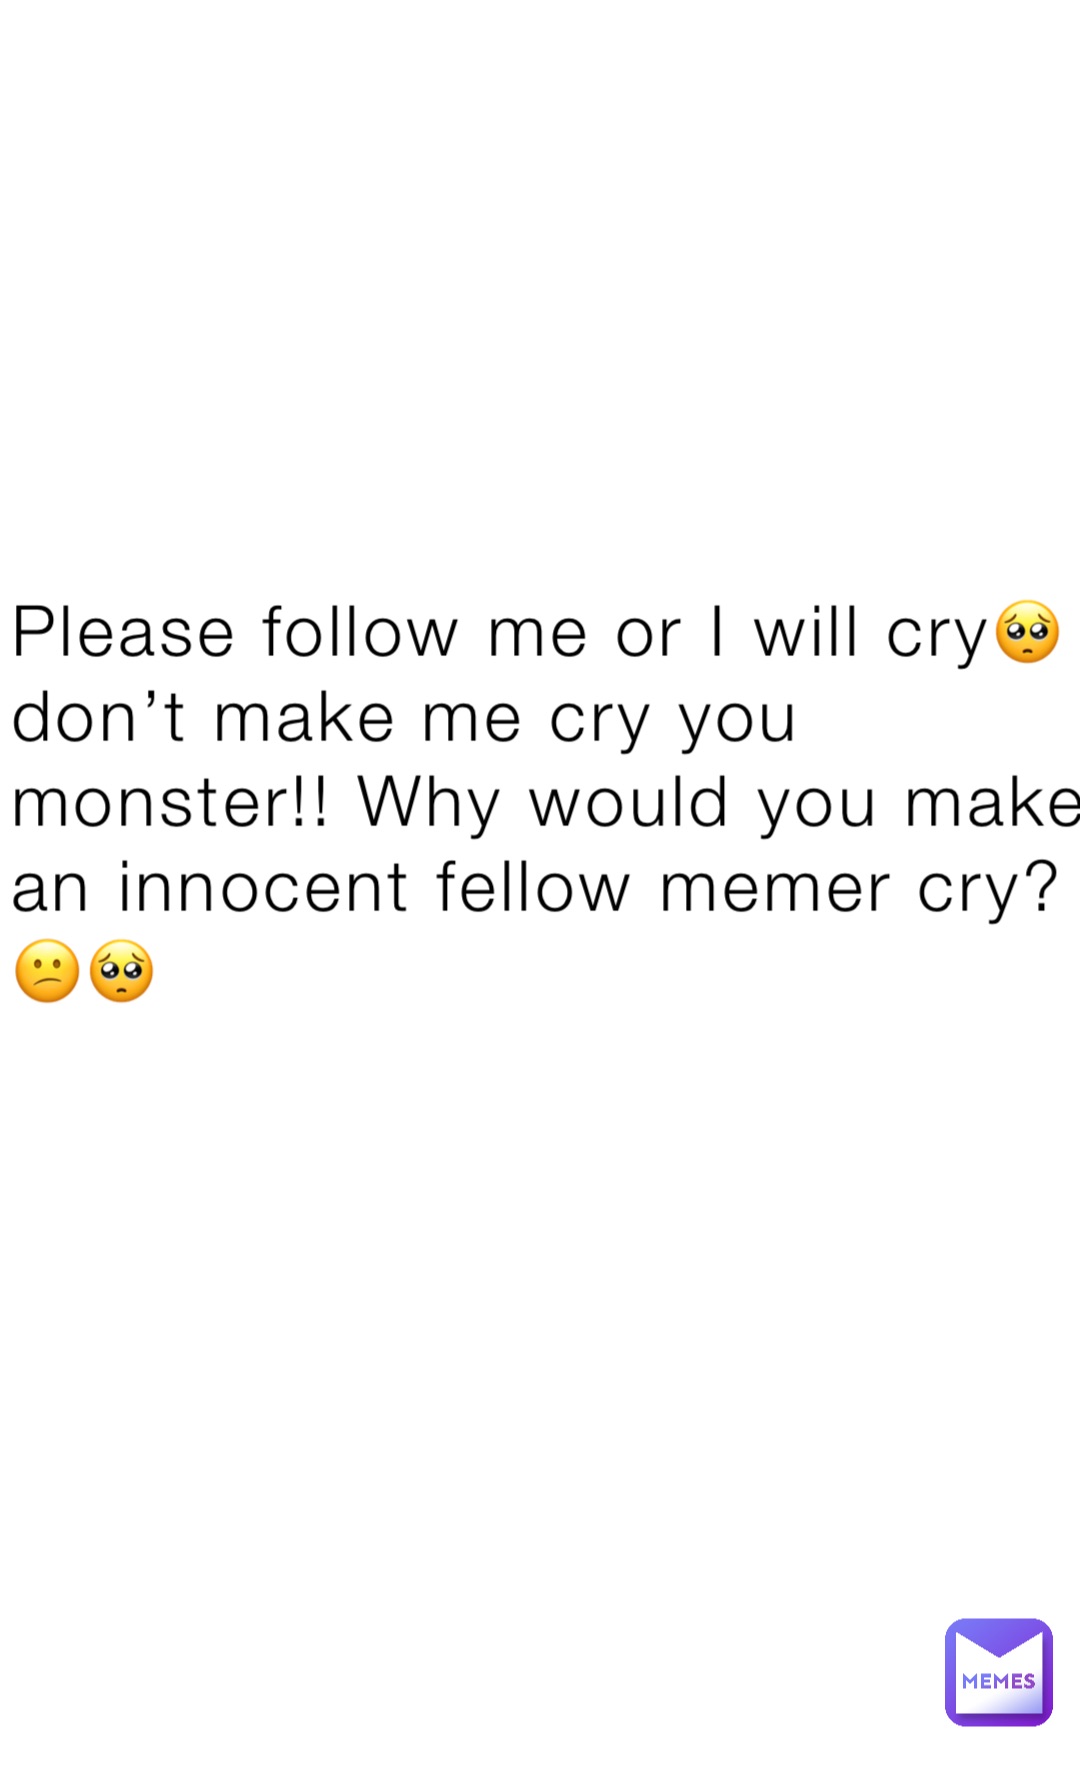 Please follow me or I will cry🥺 don’t make me cry you monster!! Why would you make an innocent fellow memer cry?😕🥺